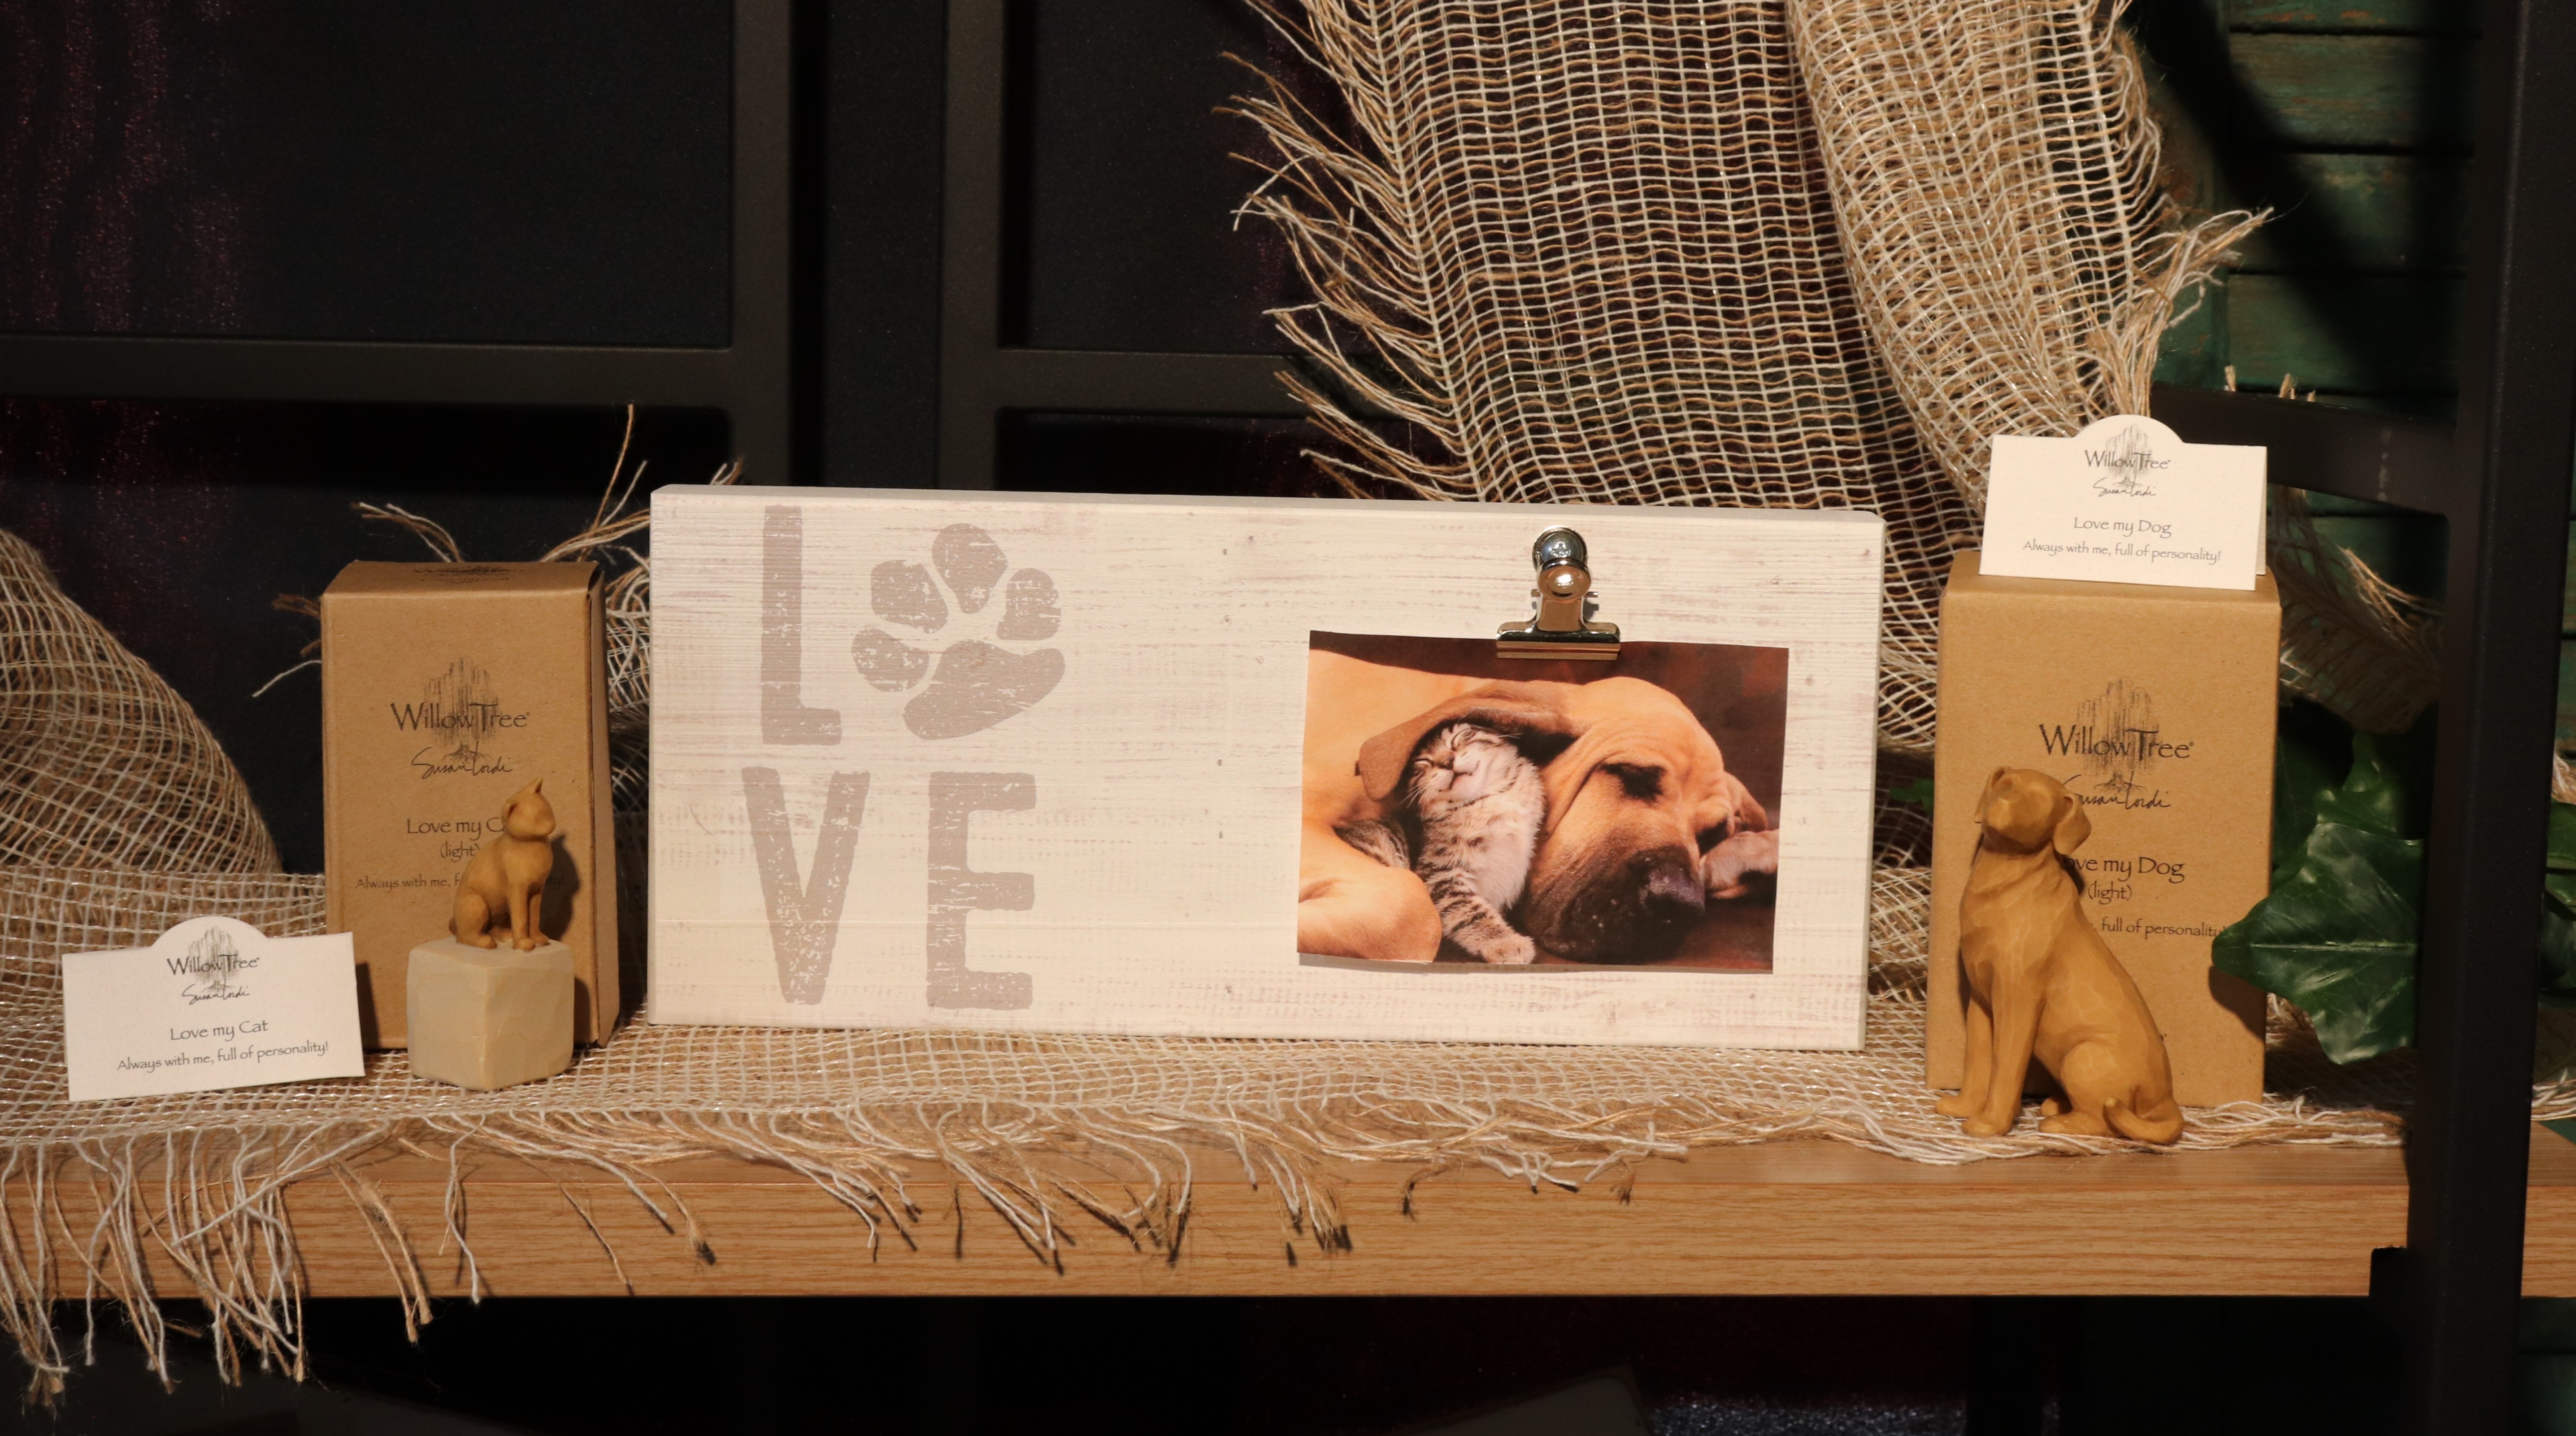 We have gifts for pet lovers!